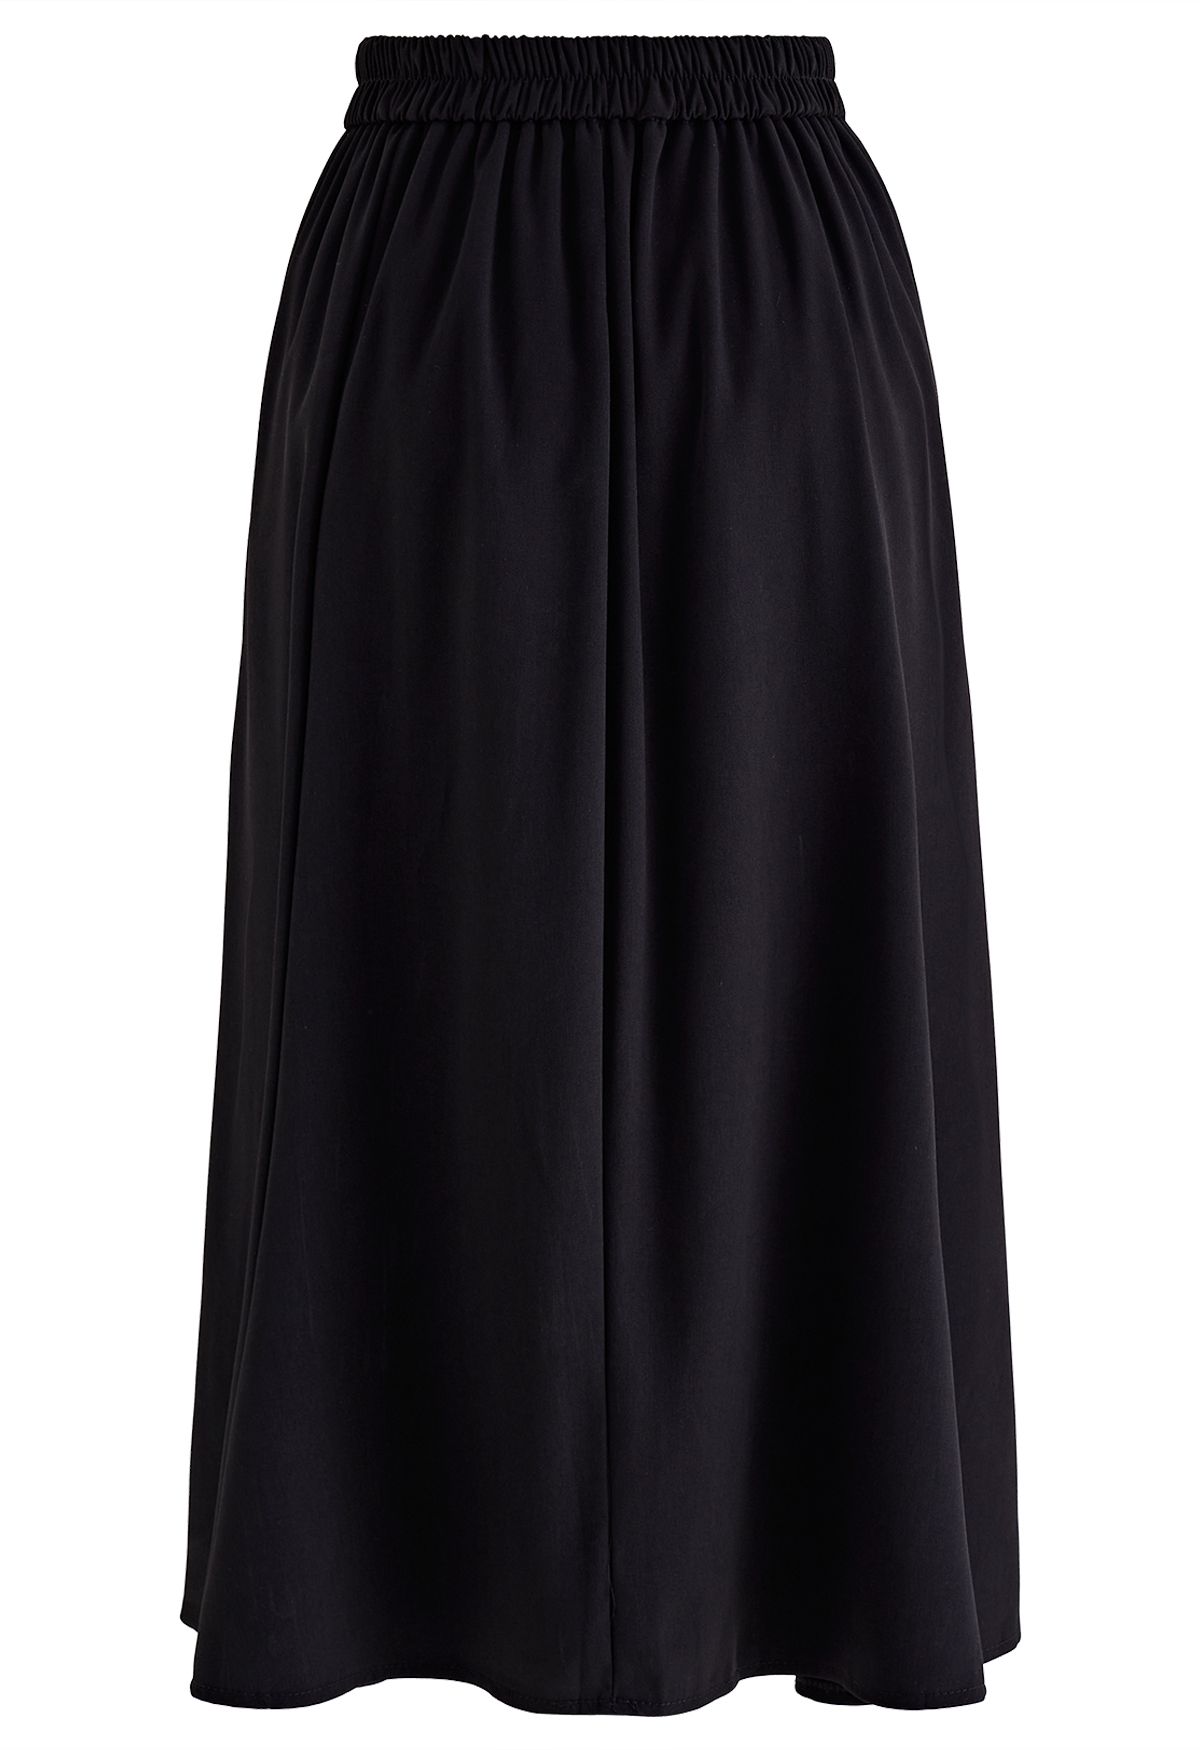 Elementary A-Line Maxi Skirt in Black - Retro, Indie and Unique Fashion